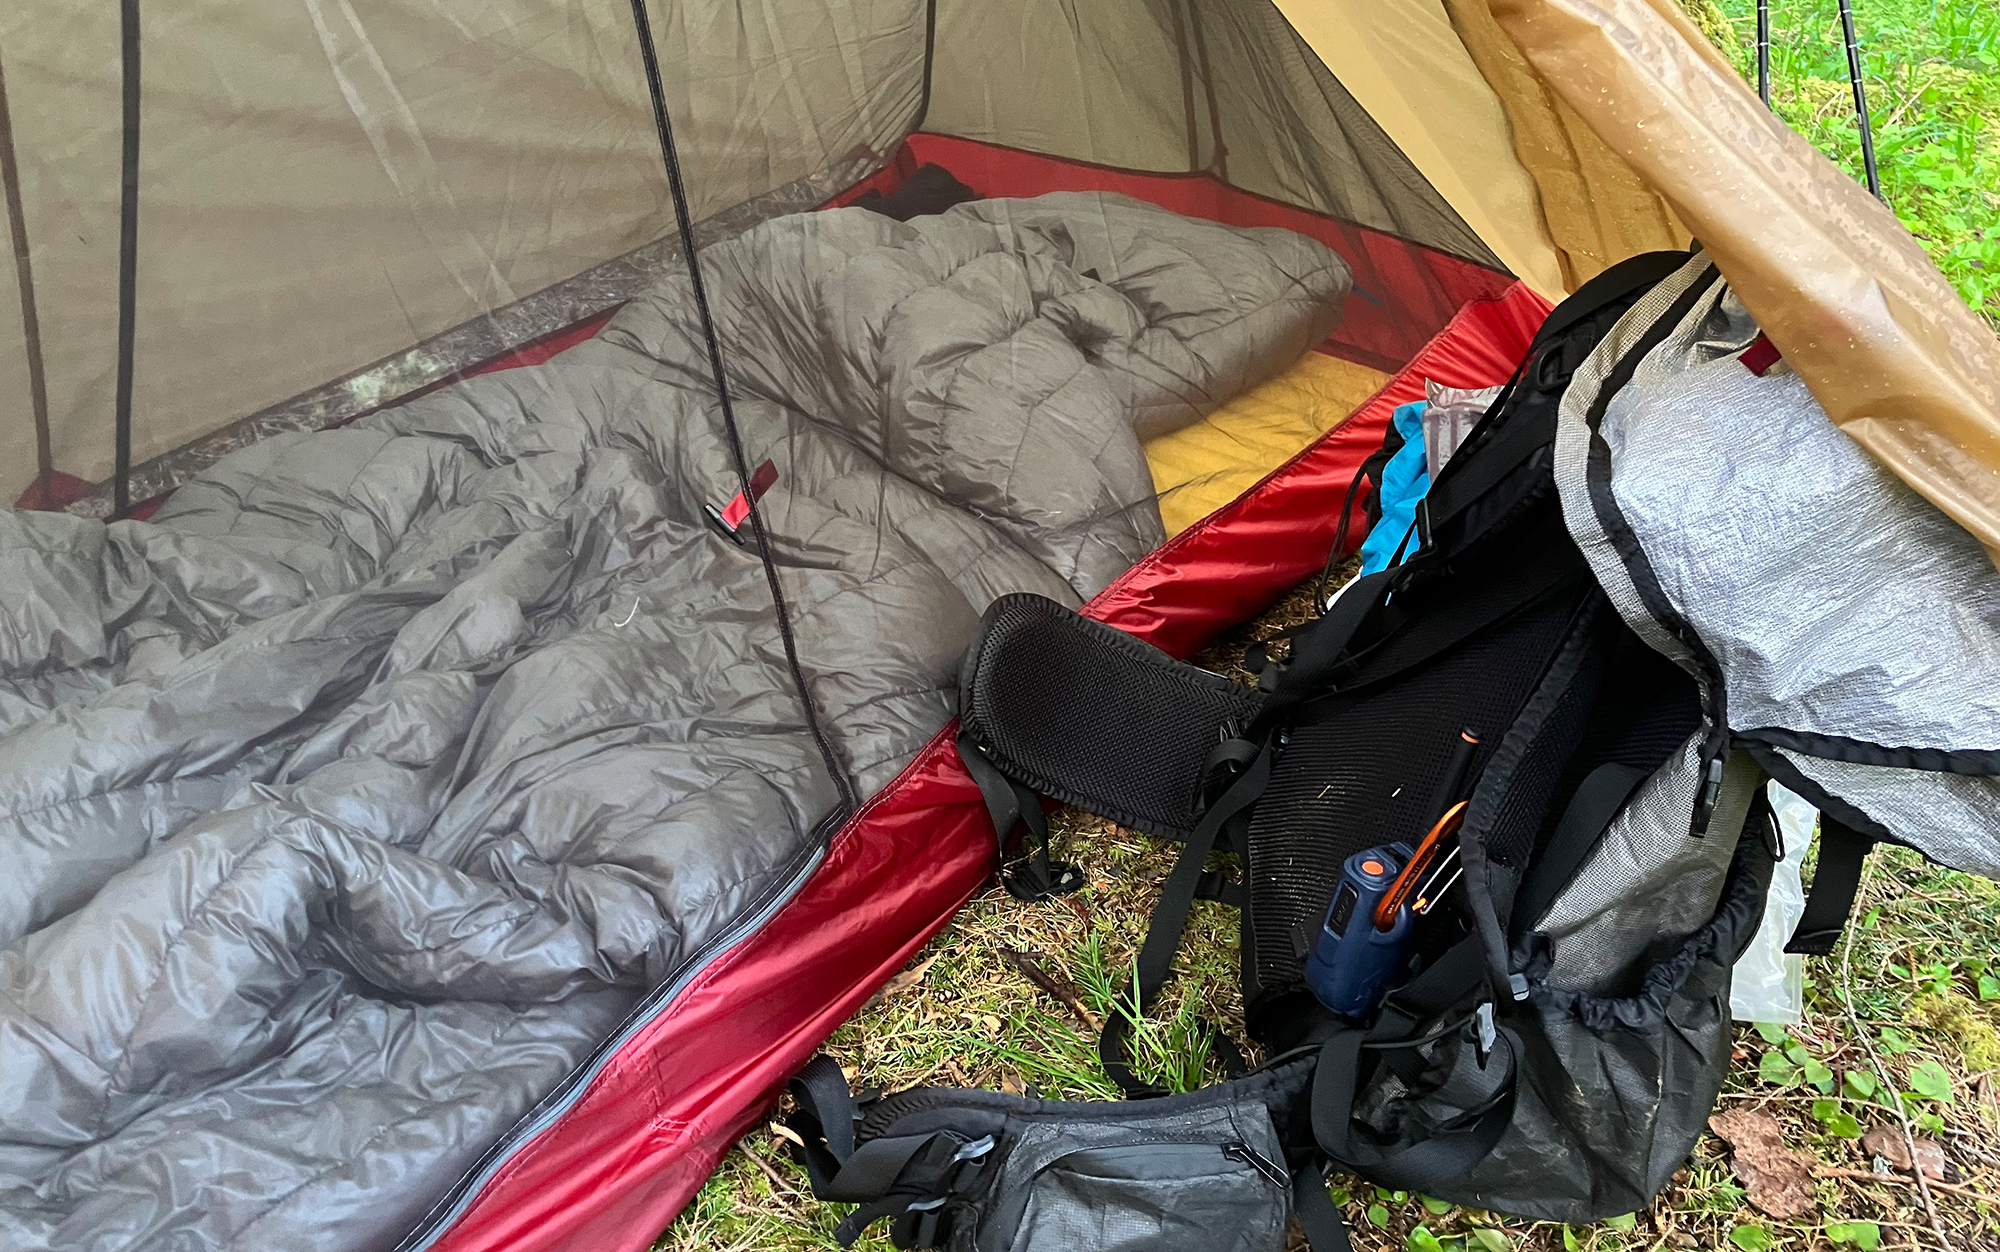 The interior of the MSR Freelite 1 fit a full-size rectangle Therm-a-Rest NeoAir, with our backpack and the rest of our kit stowed in the vestibule. Like with the Big Agnes Tiger Wall UL and NEMO Hornet OSMO, we appreciated that this one had multiple storage pockets inside.